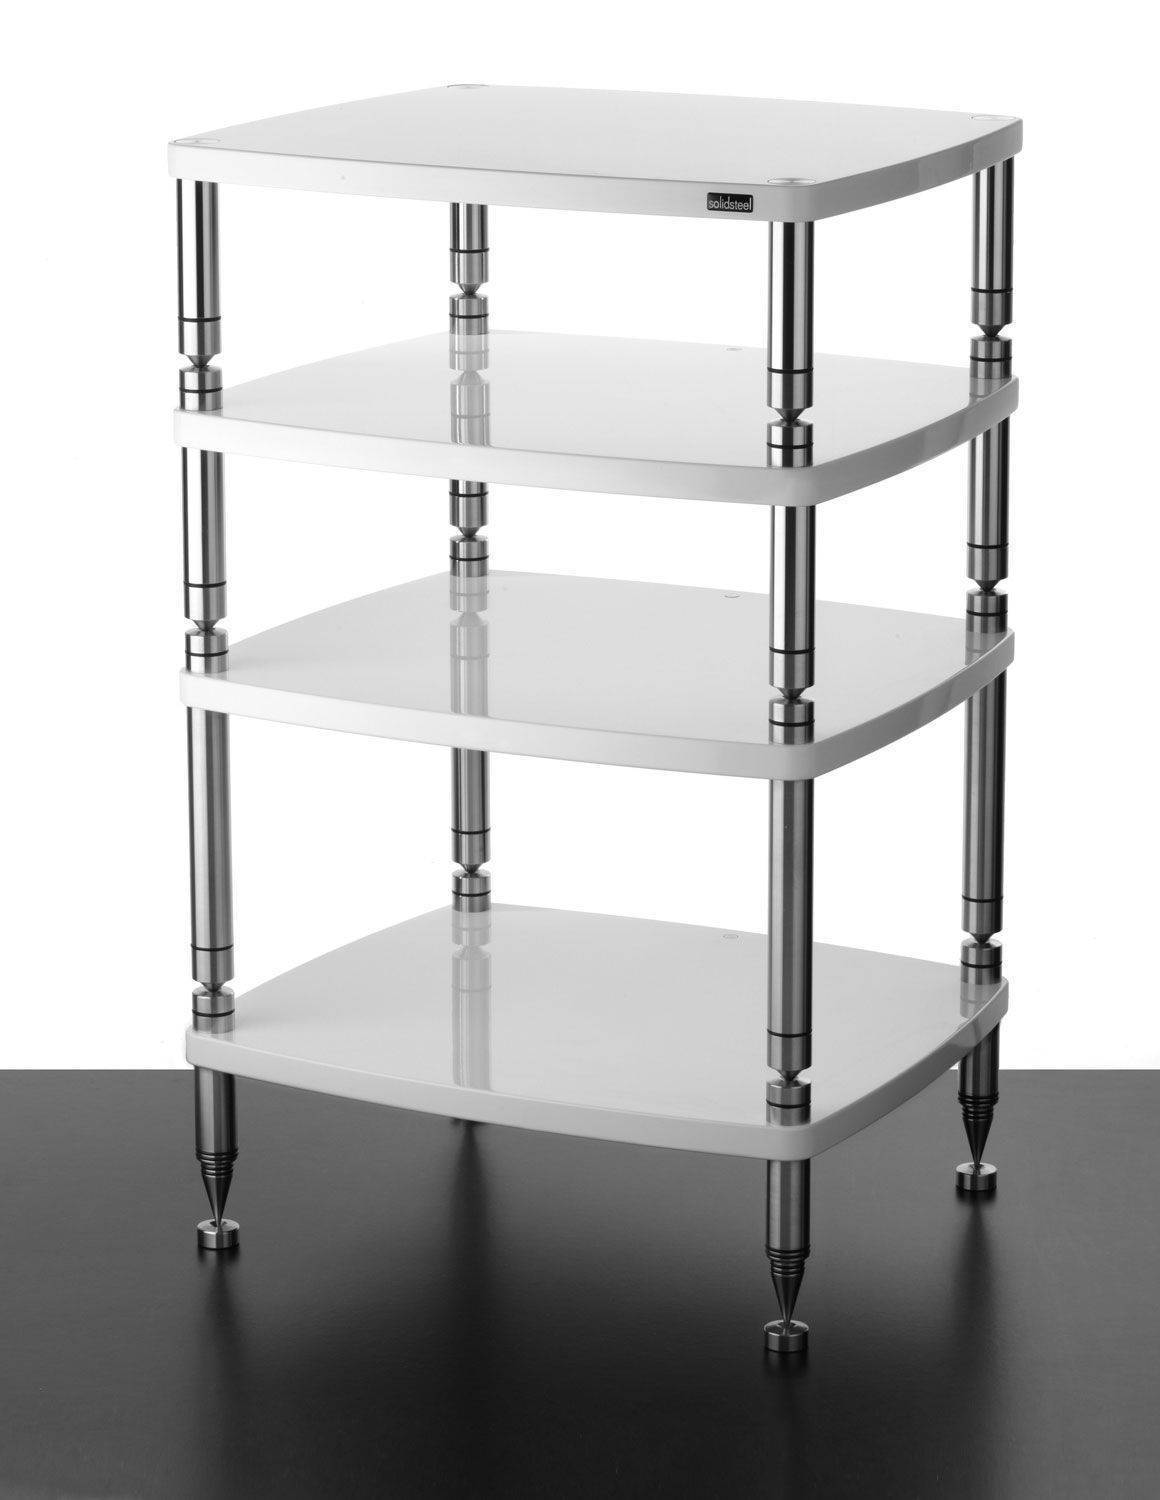 Solidsteel Hyperspike HF Audio Stands at Upscale Audio